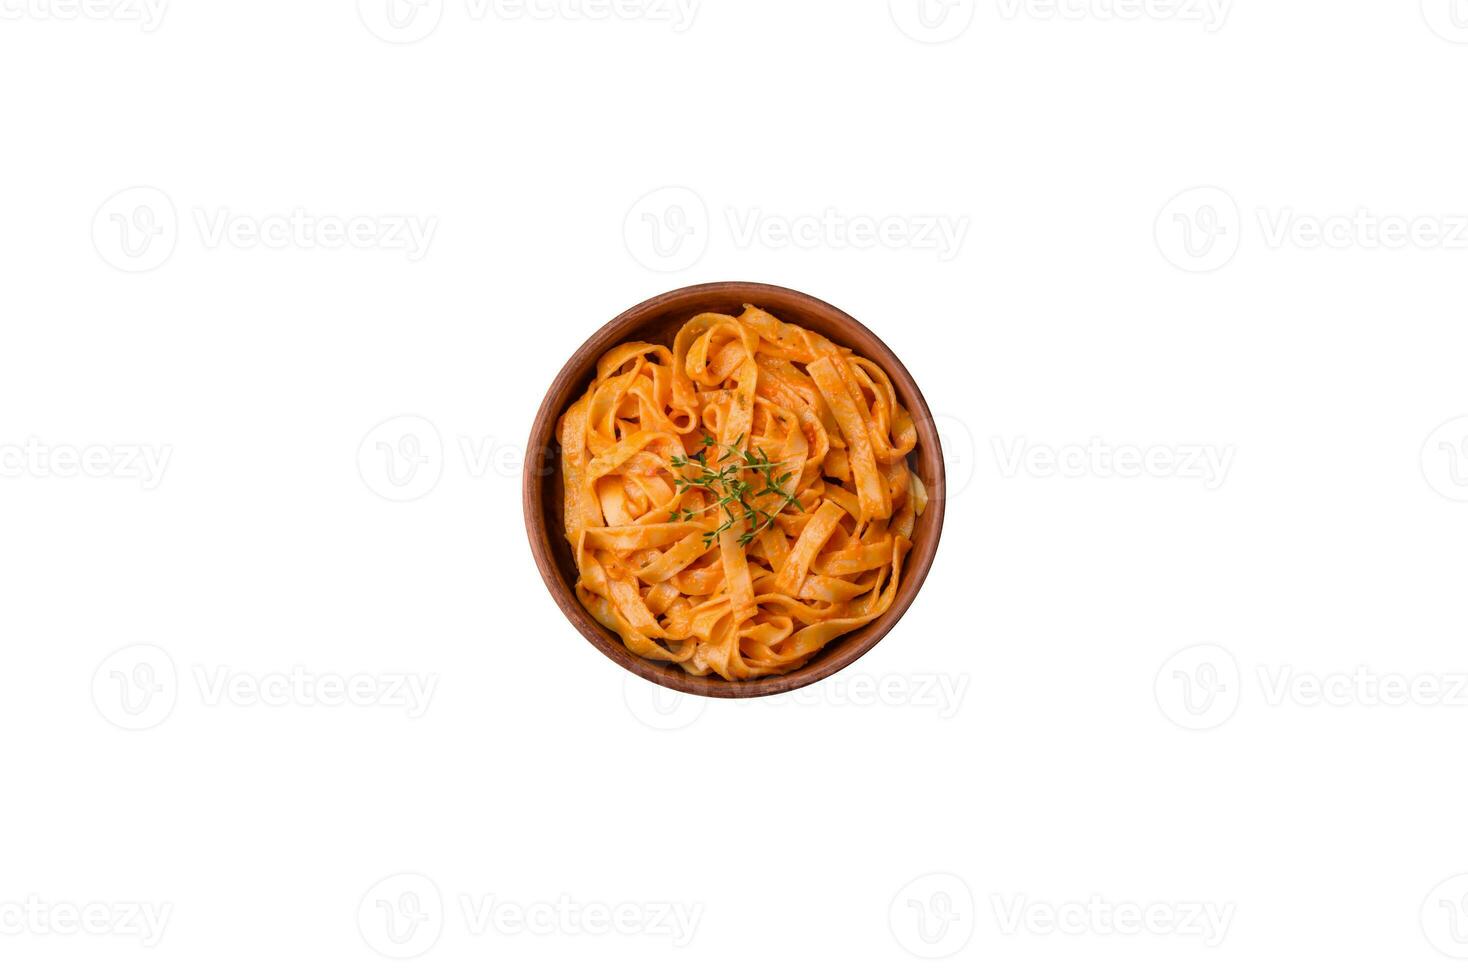 Delicious fresh pasta with pesto sauce, salt, spices and herbs on a ceramic plate photo